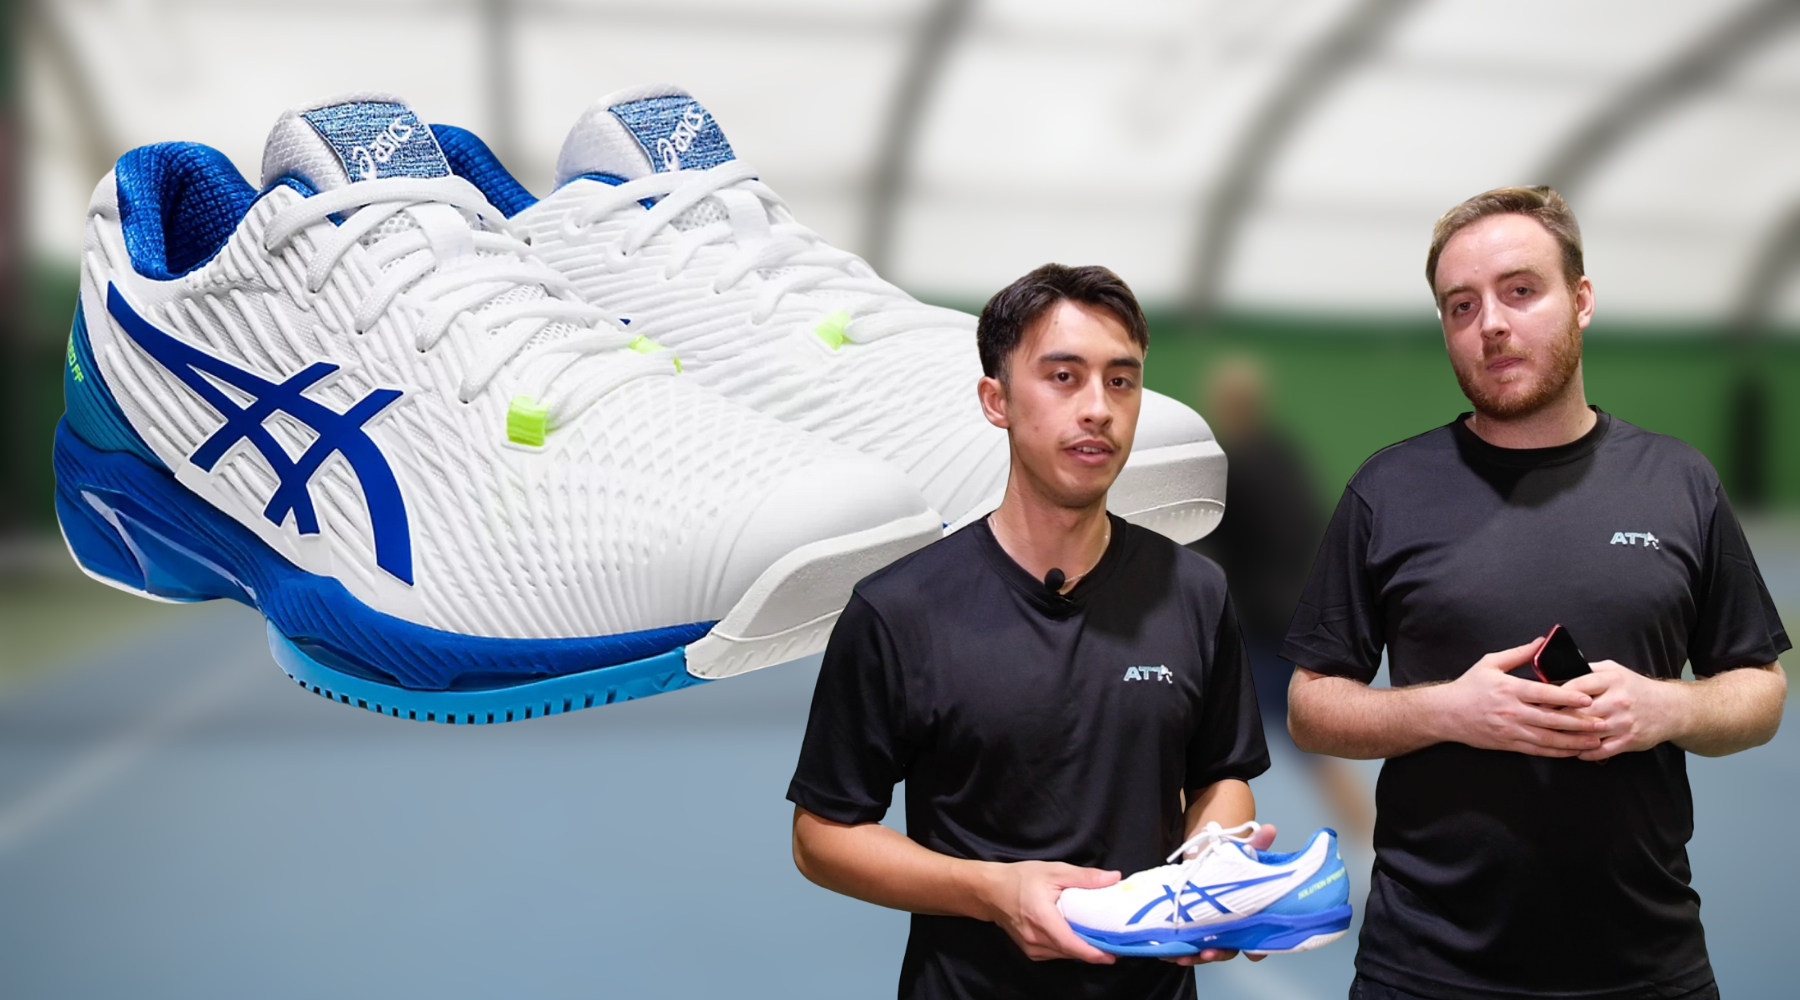 ASICS Solution Speed FF2 tennis shoe review